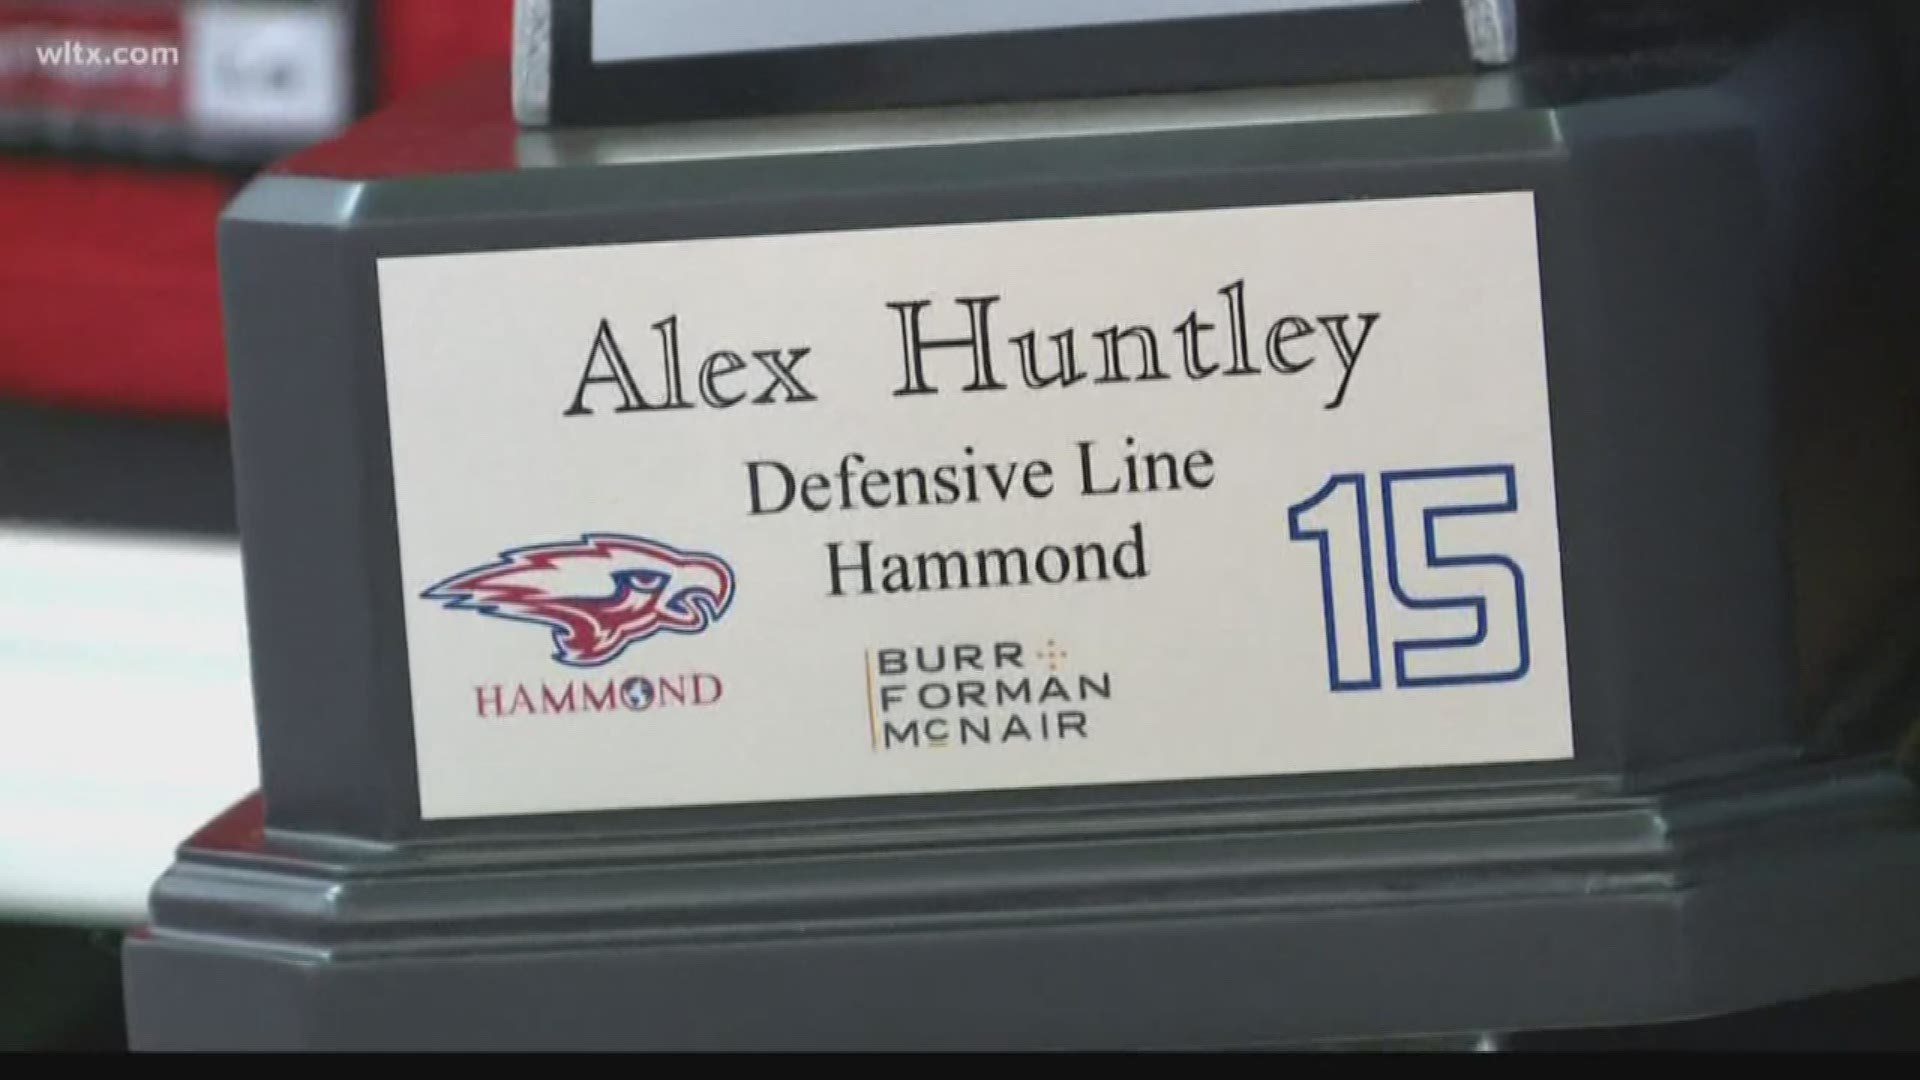 Hammond defensive lineman Boogie Huntley is honored by Richland County for his work on and off the field.